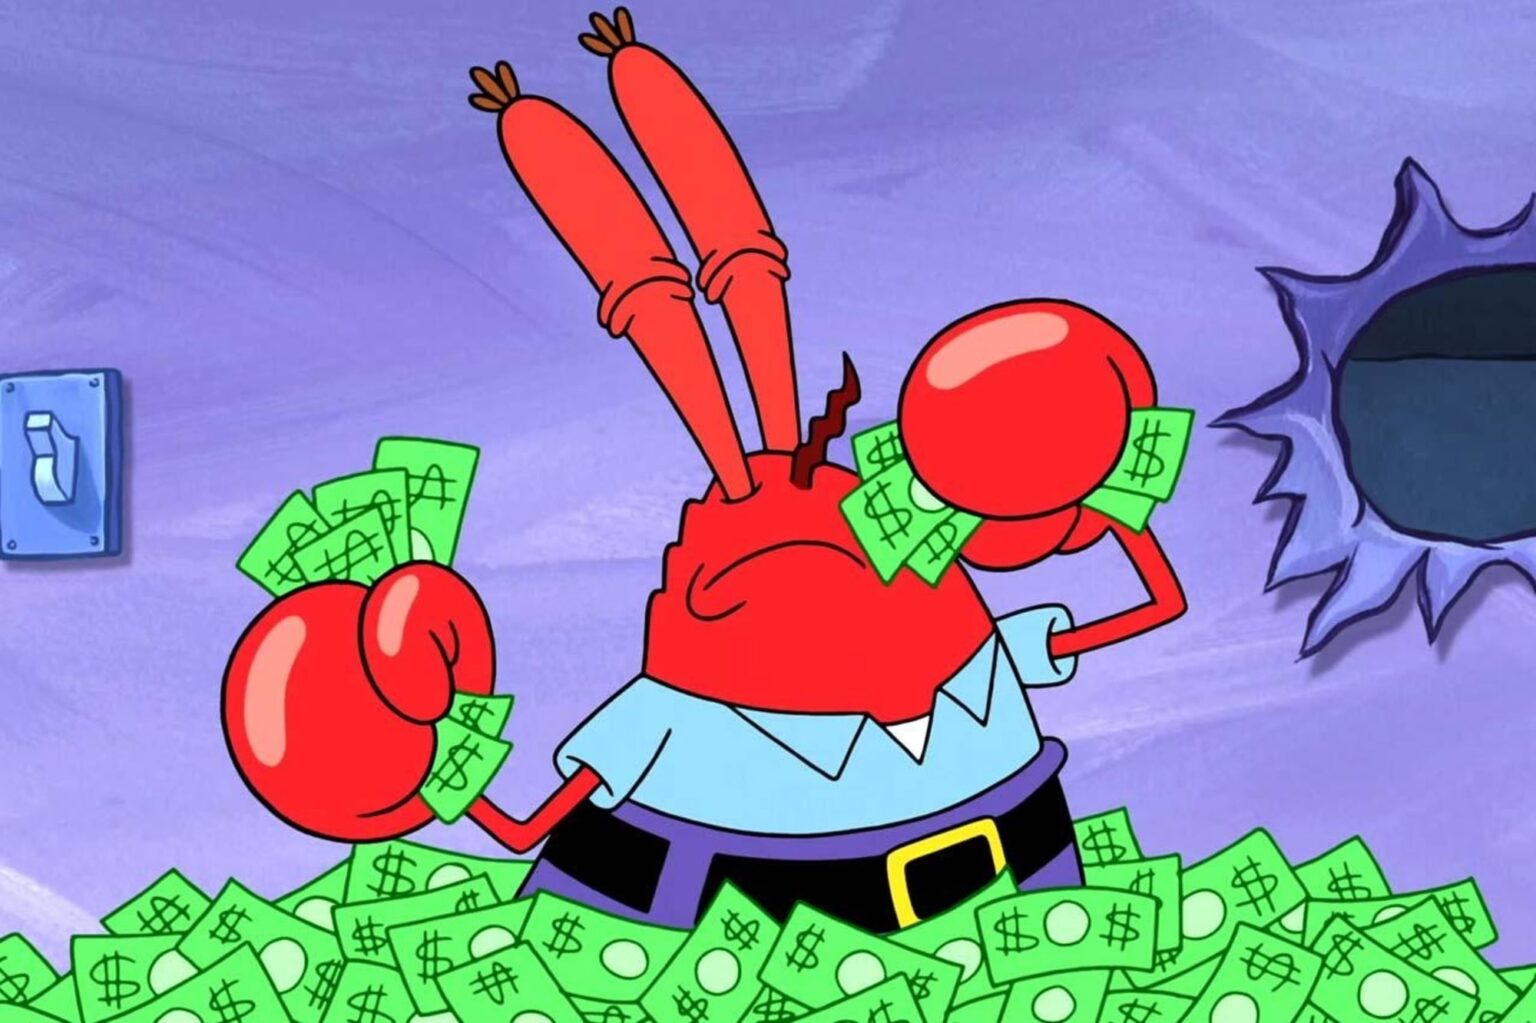 Are you finding characters from SpongeBob SquarePants more relatable? Take a look at these Mr Krabs memes that are bound to make you do a double take.